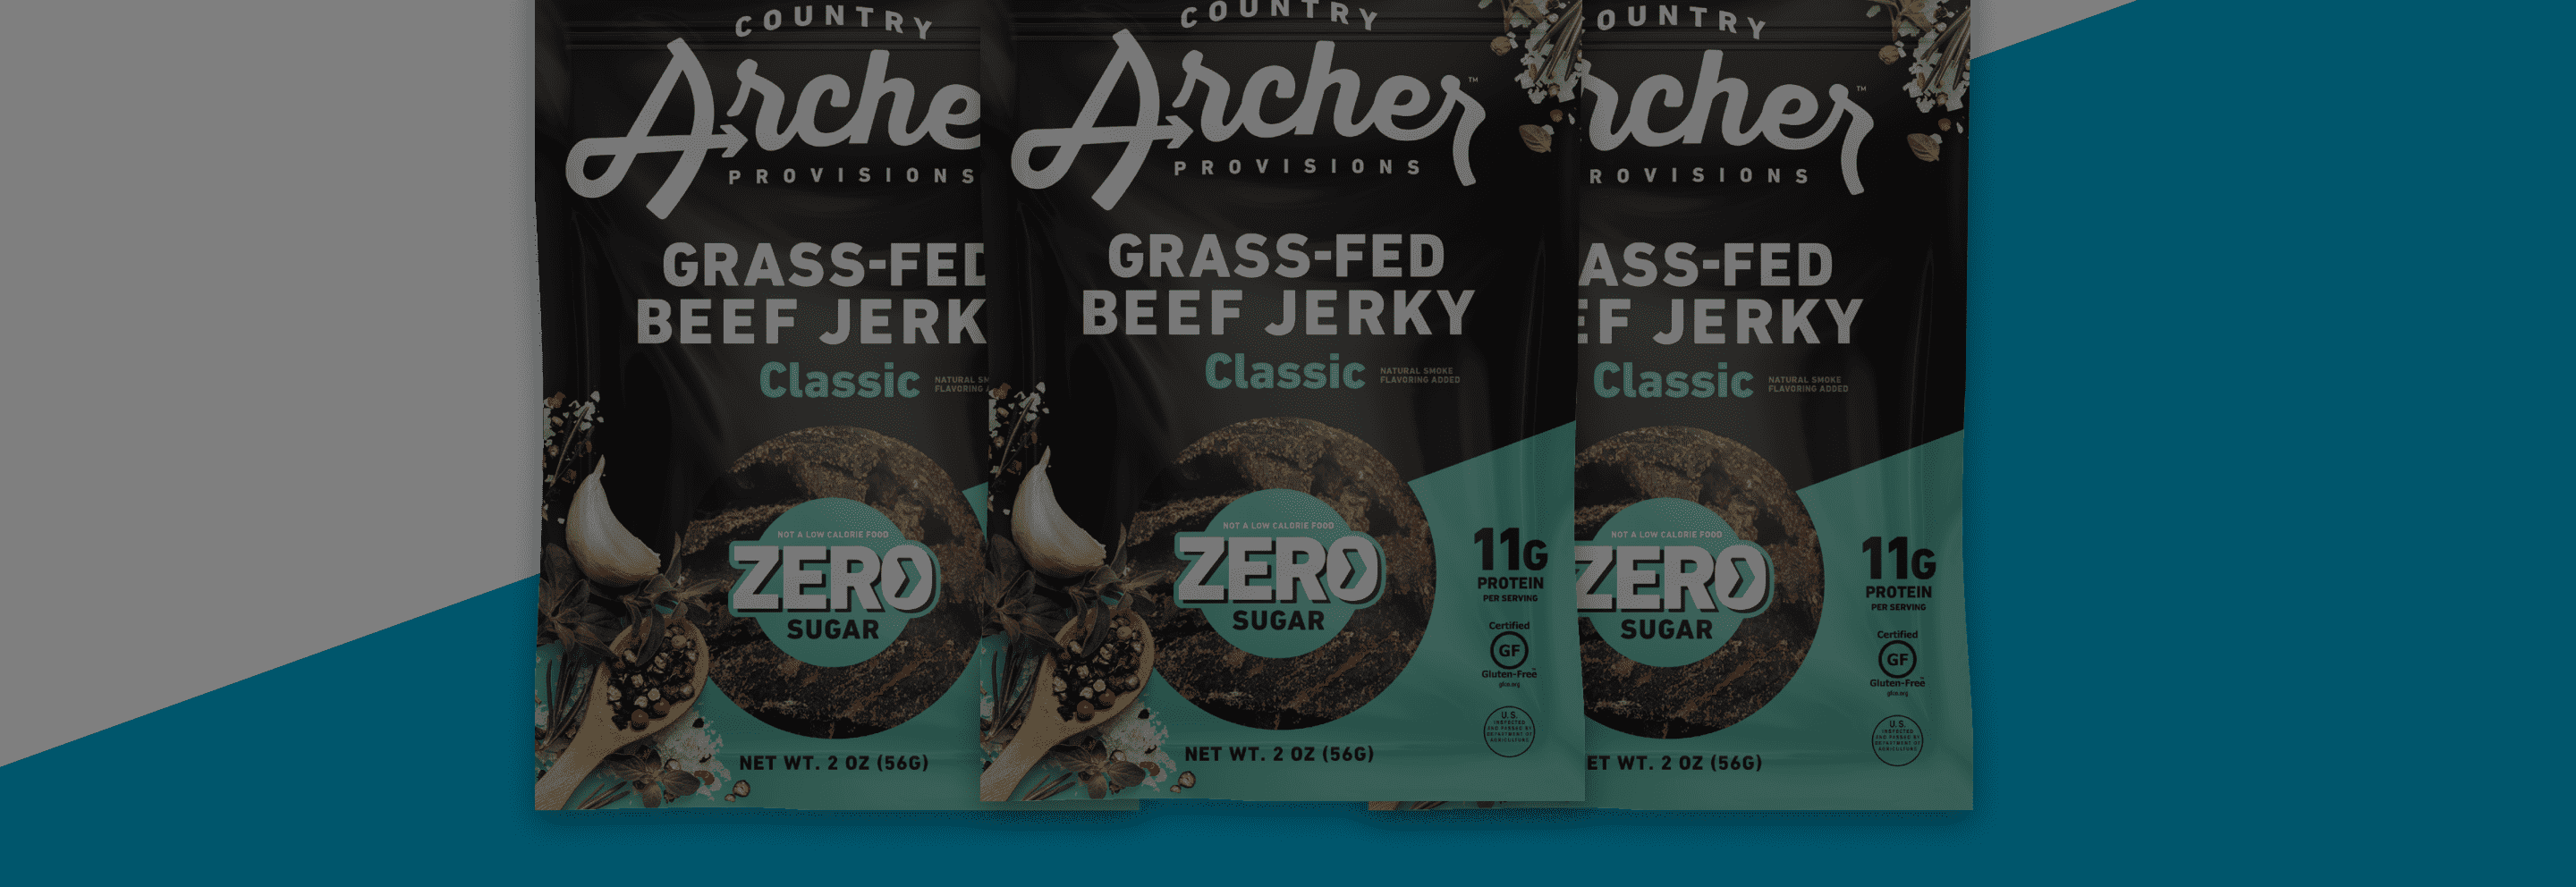 Teriyaki Beef Jerky  Country Archer – Country Archer Provisions